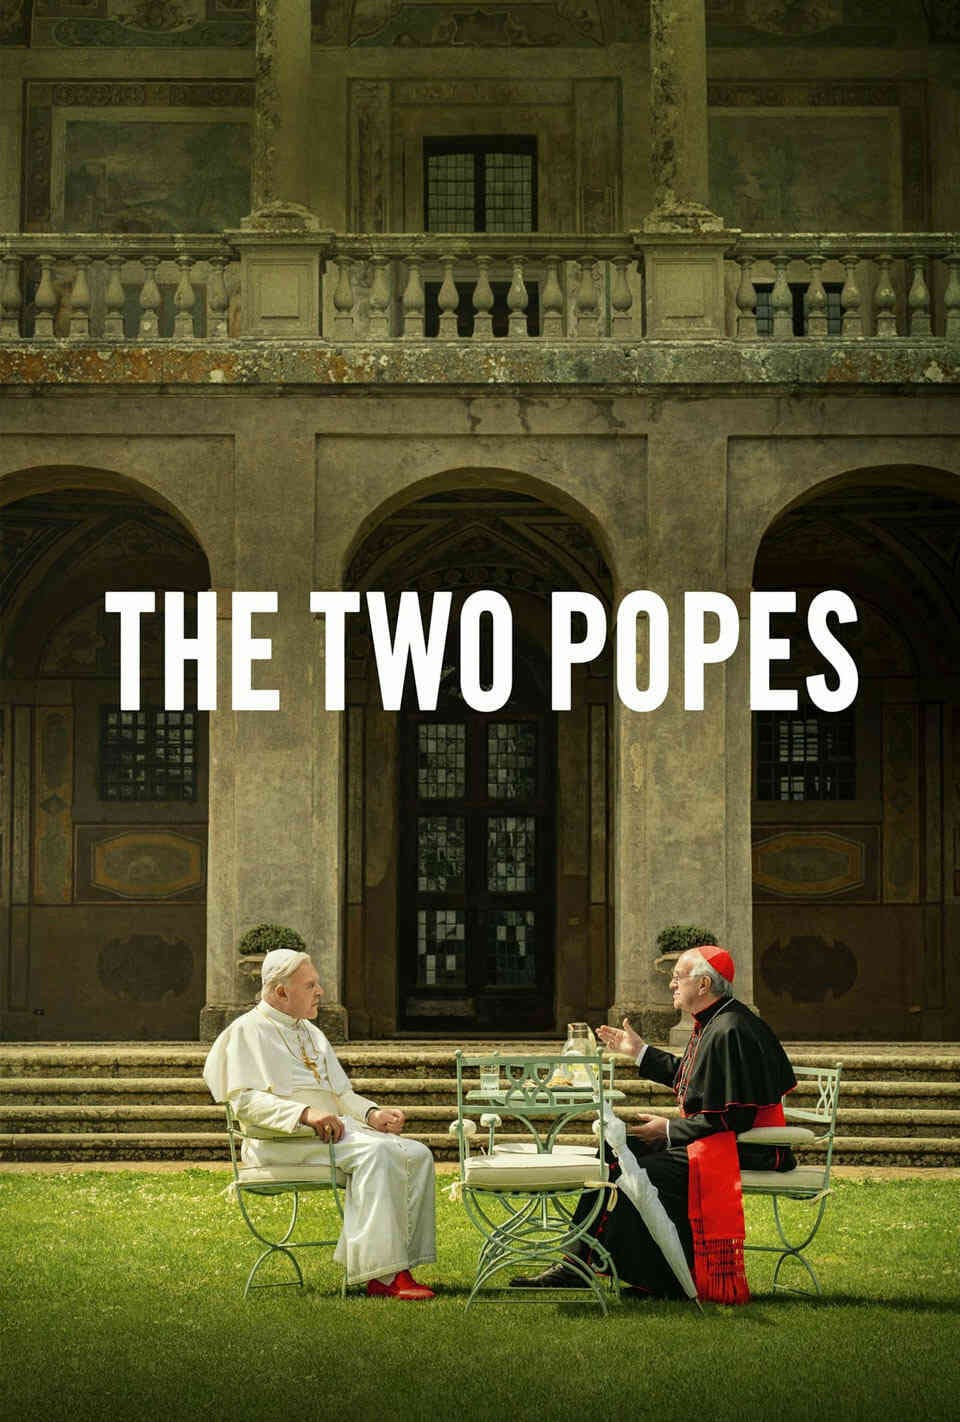 Read The Two Popes screenplay.